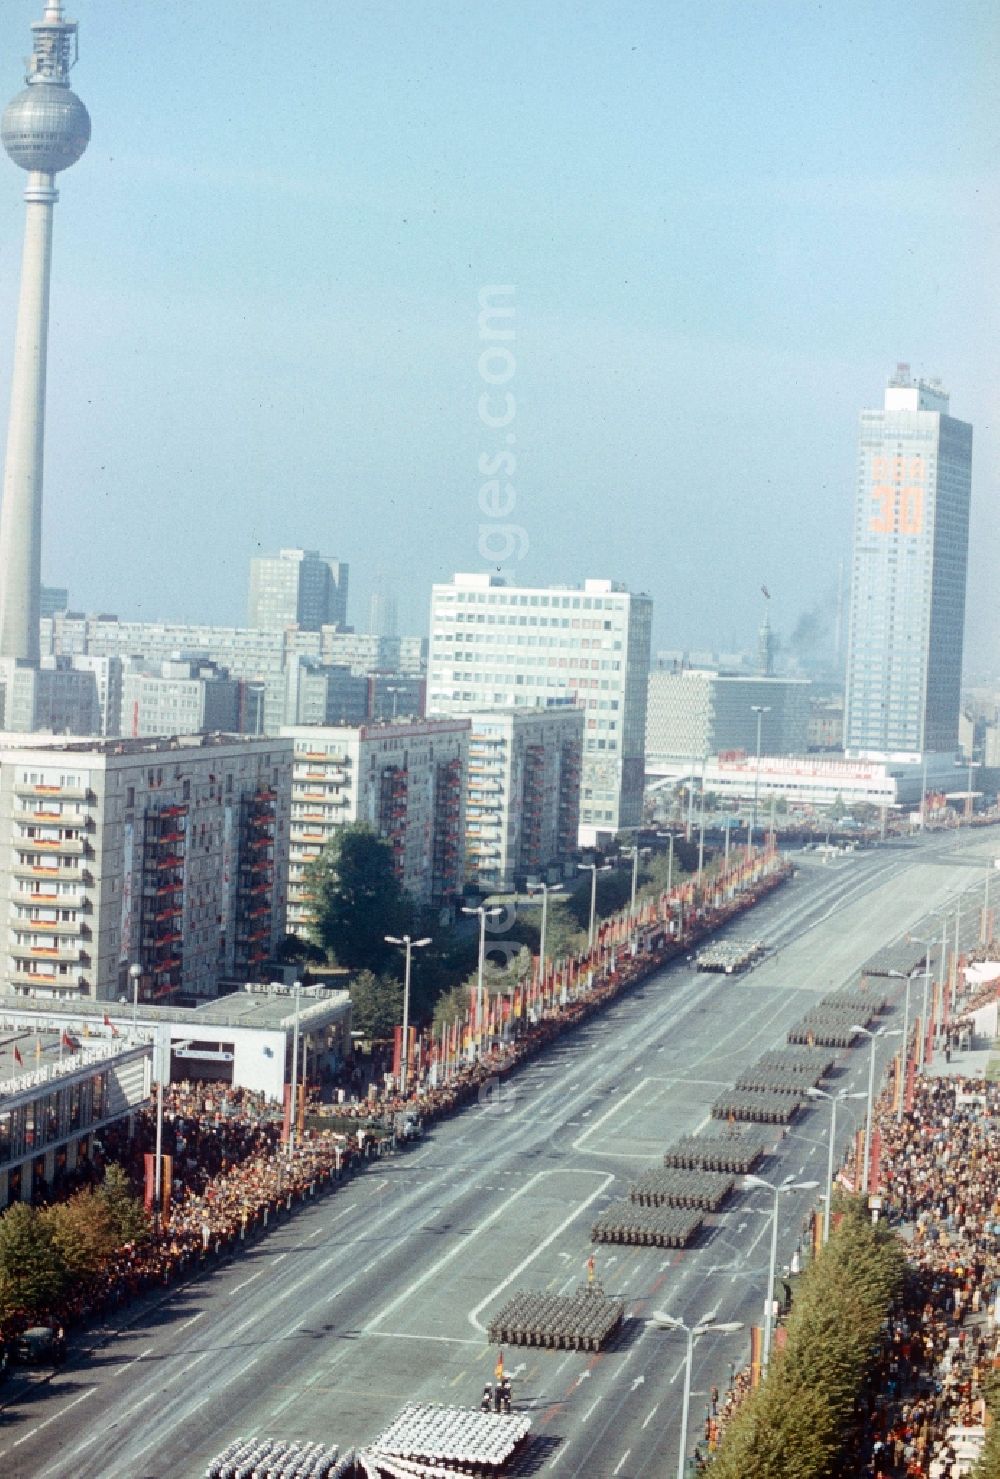 Berlin: Honour parade of the NVA on the 3